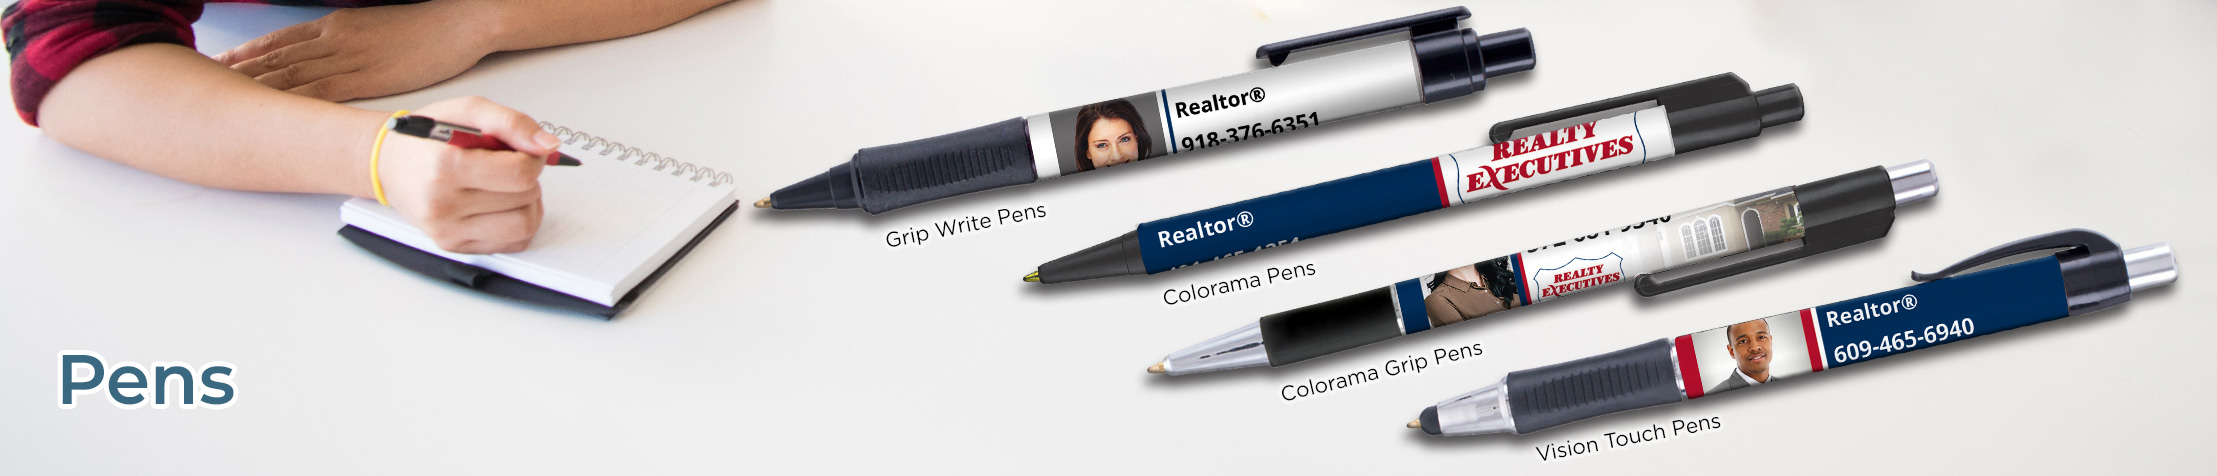 Realty Executives Real Estate Personalized Pens - promotional products: Grip Write Pens, Colorama Pens, Vision Touch Pens, and Colorama Grip Pens | BestPrintBuy.com